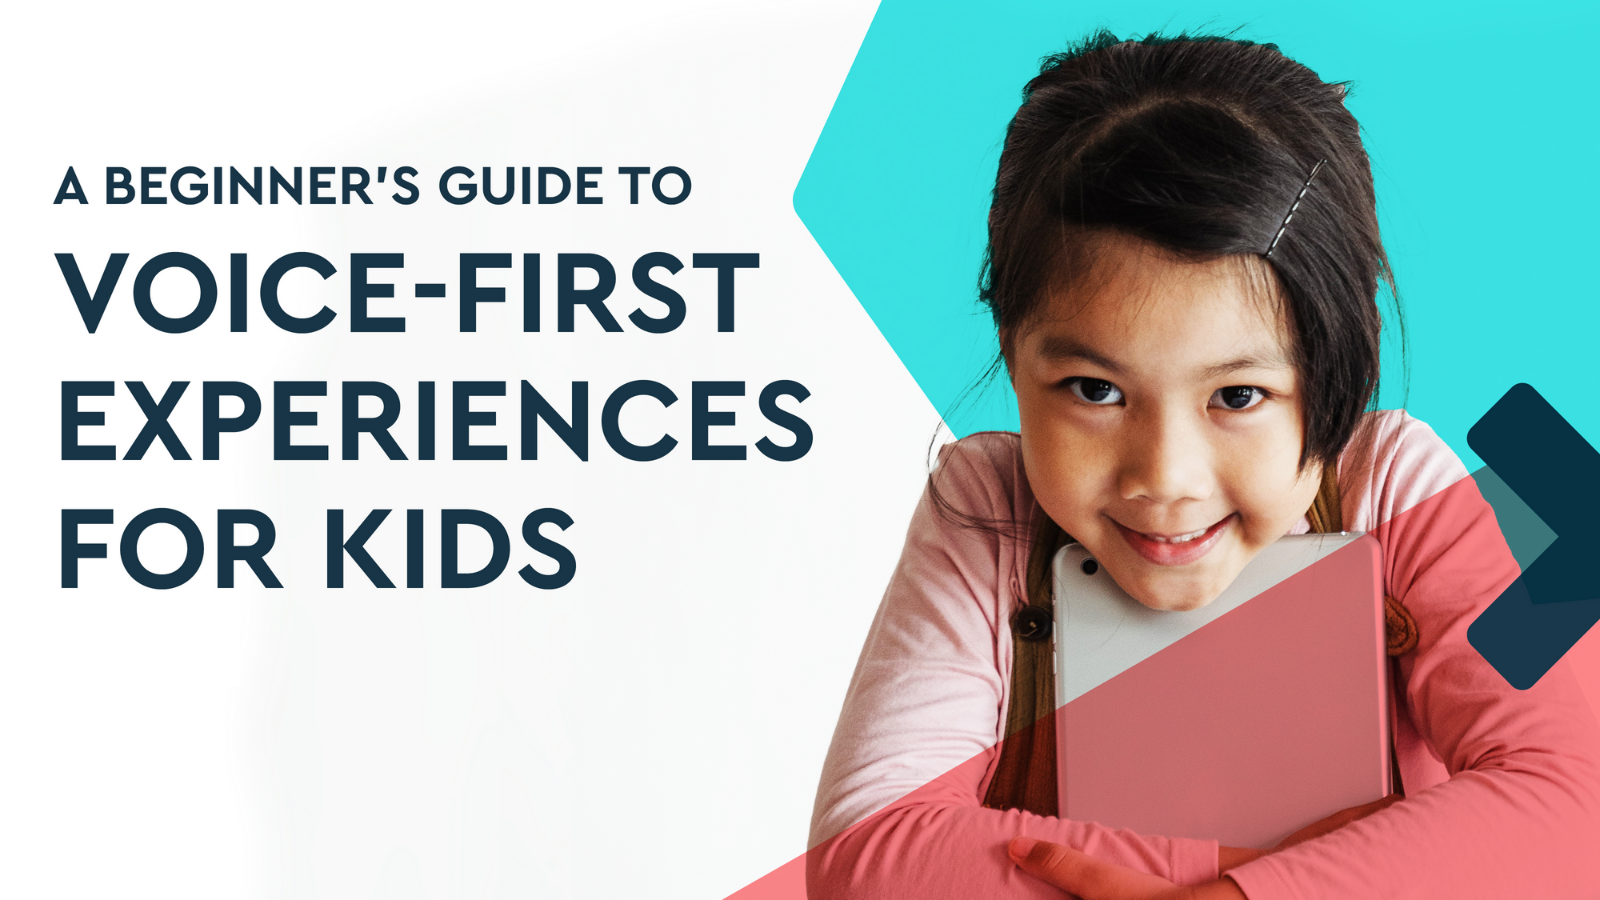 An image with text that says, "A Beginner's Guide to Voice-First experiences for kids."